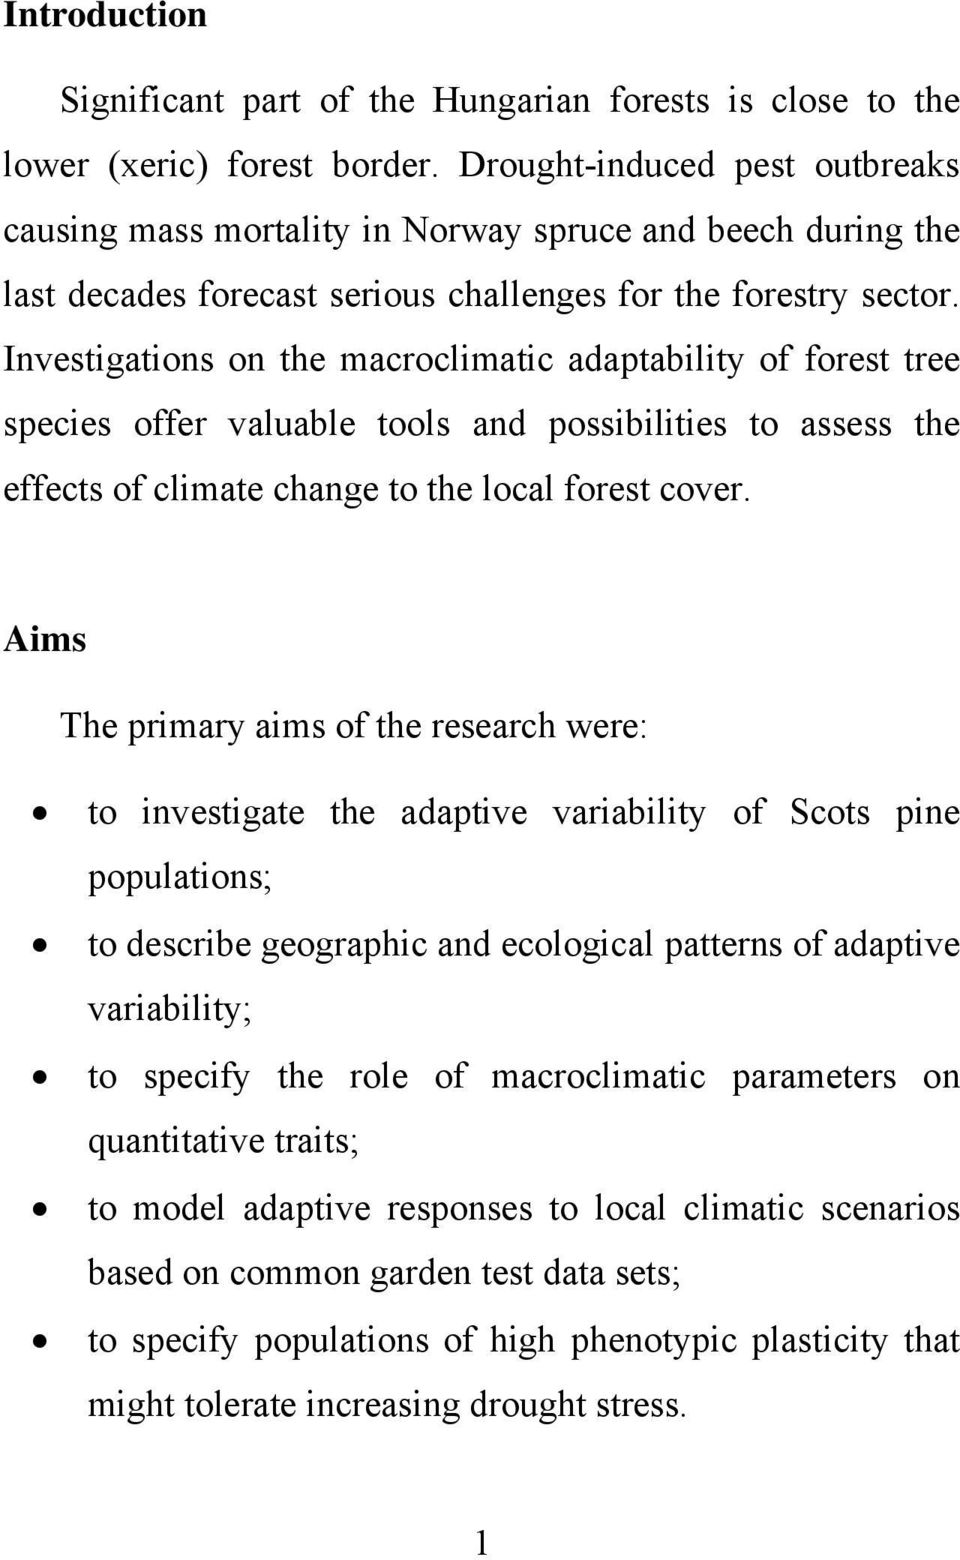 Investigations on the macroclimatic adaptability of forest tree species offer valuable tools and possibilities to assess the effects of climate change to the local forest cover.